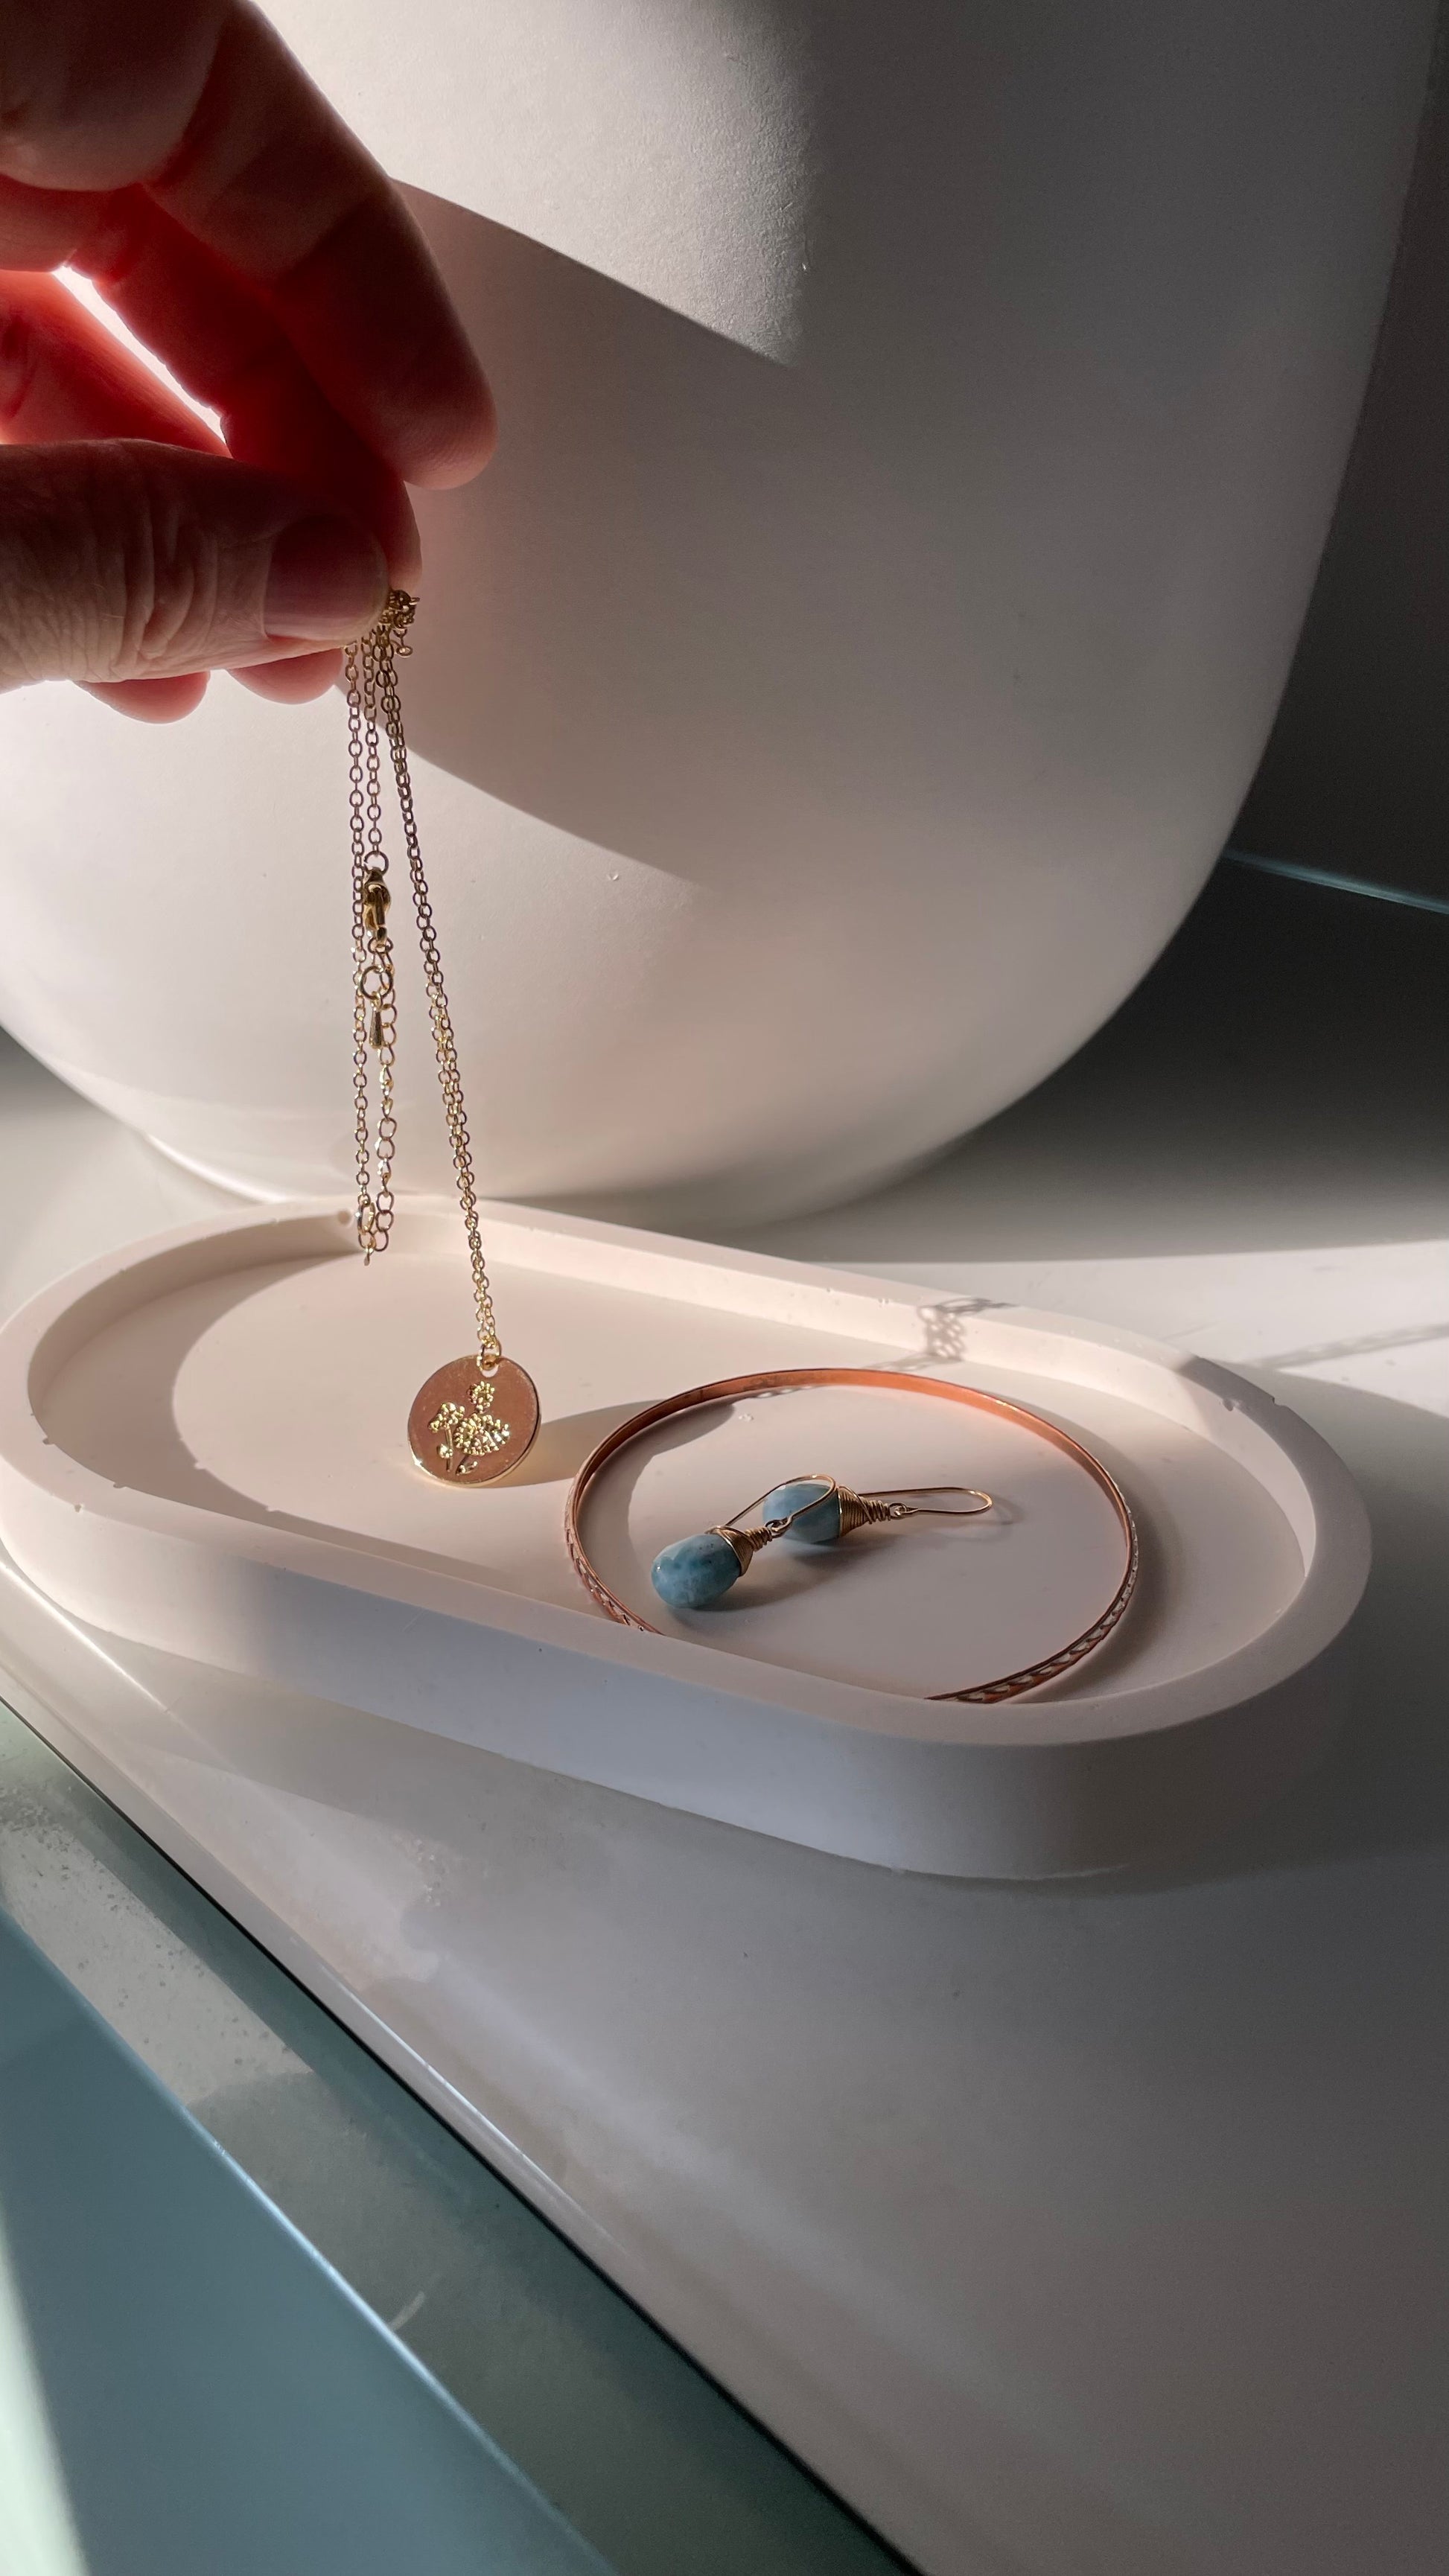 A hand is reaching to add jewelry to a white oval tray.